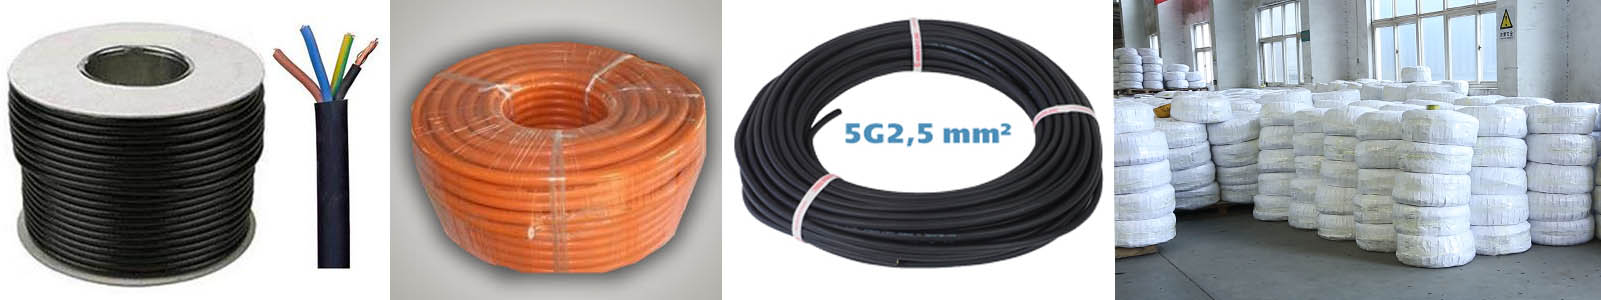 rubber fiber hybrid cable package 